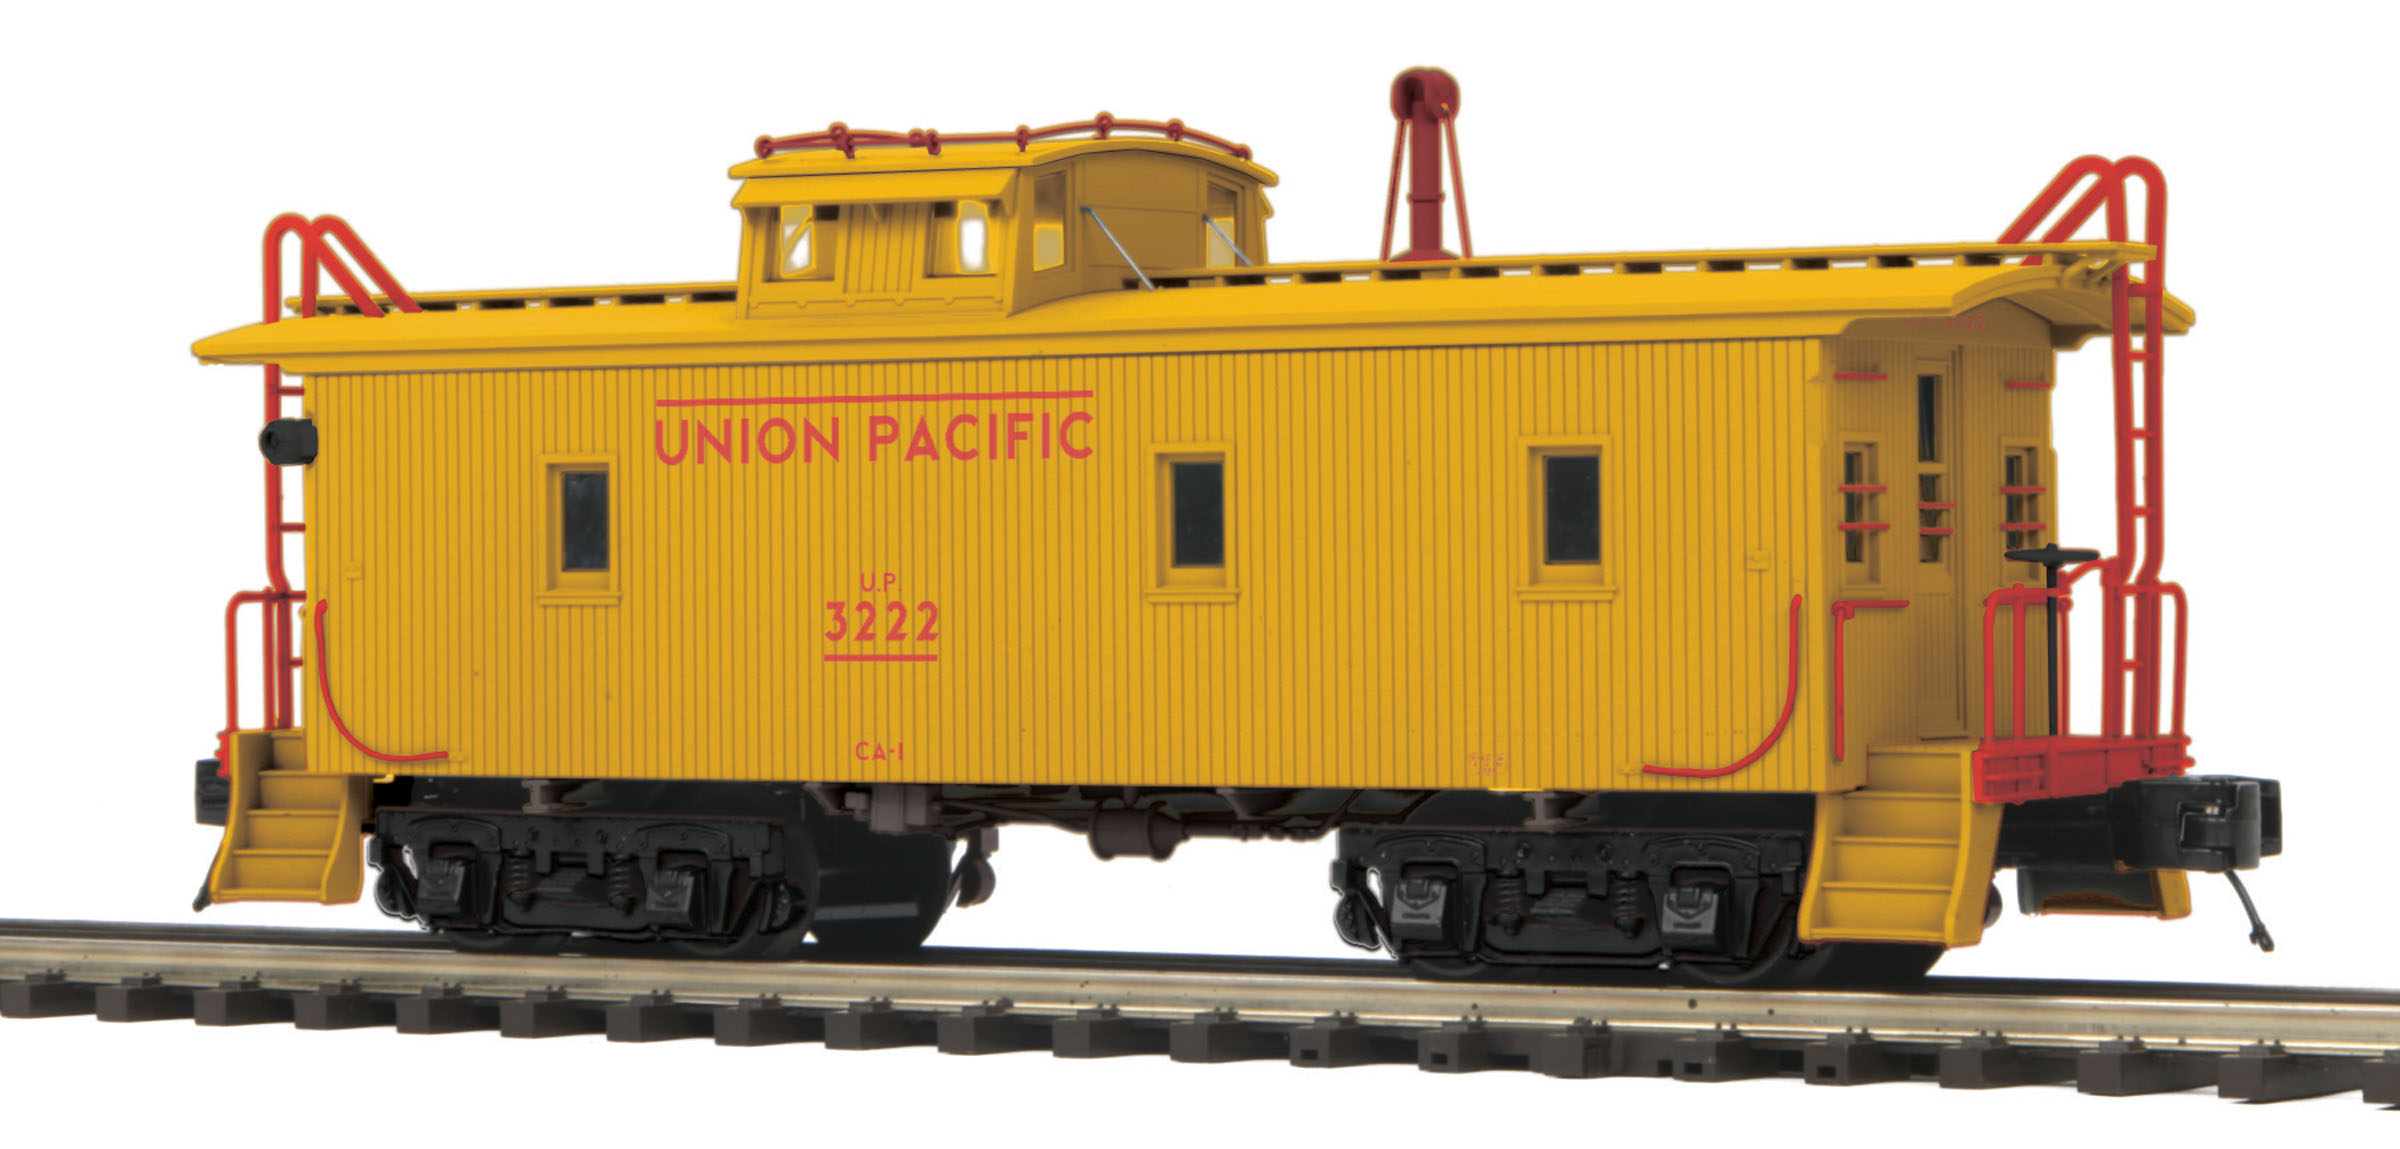 Lionel's 6-81840 is in the 2014 Signature catalog a depicts a CA-4 as 